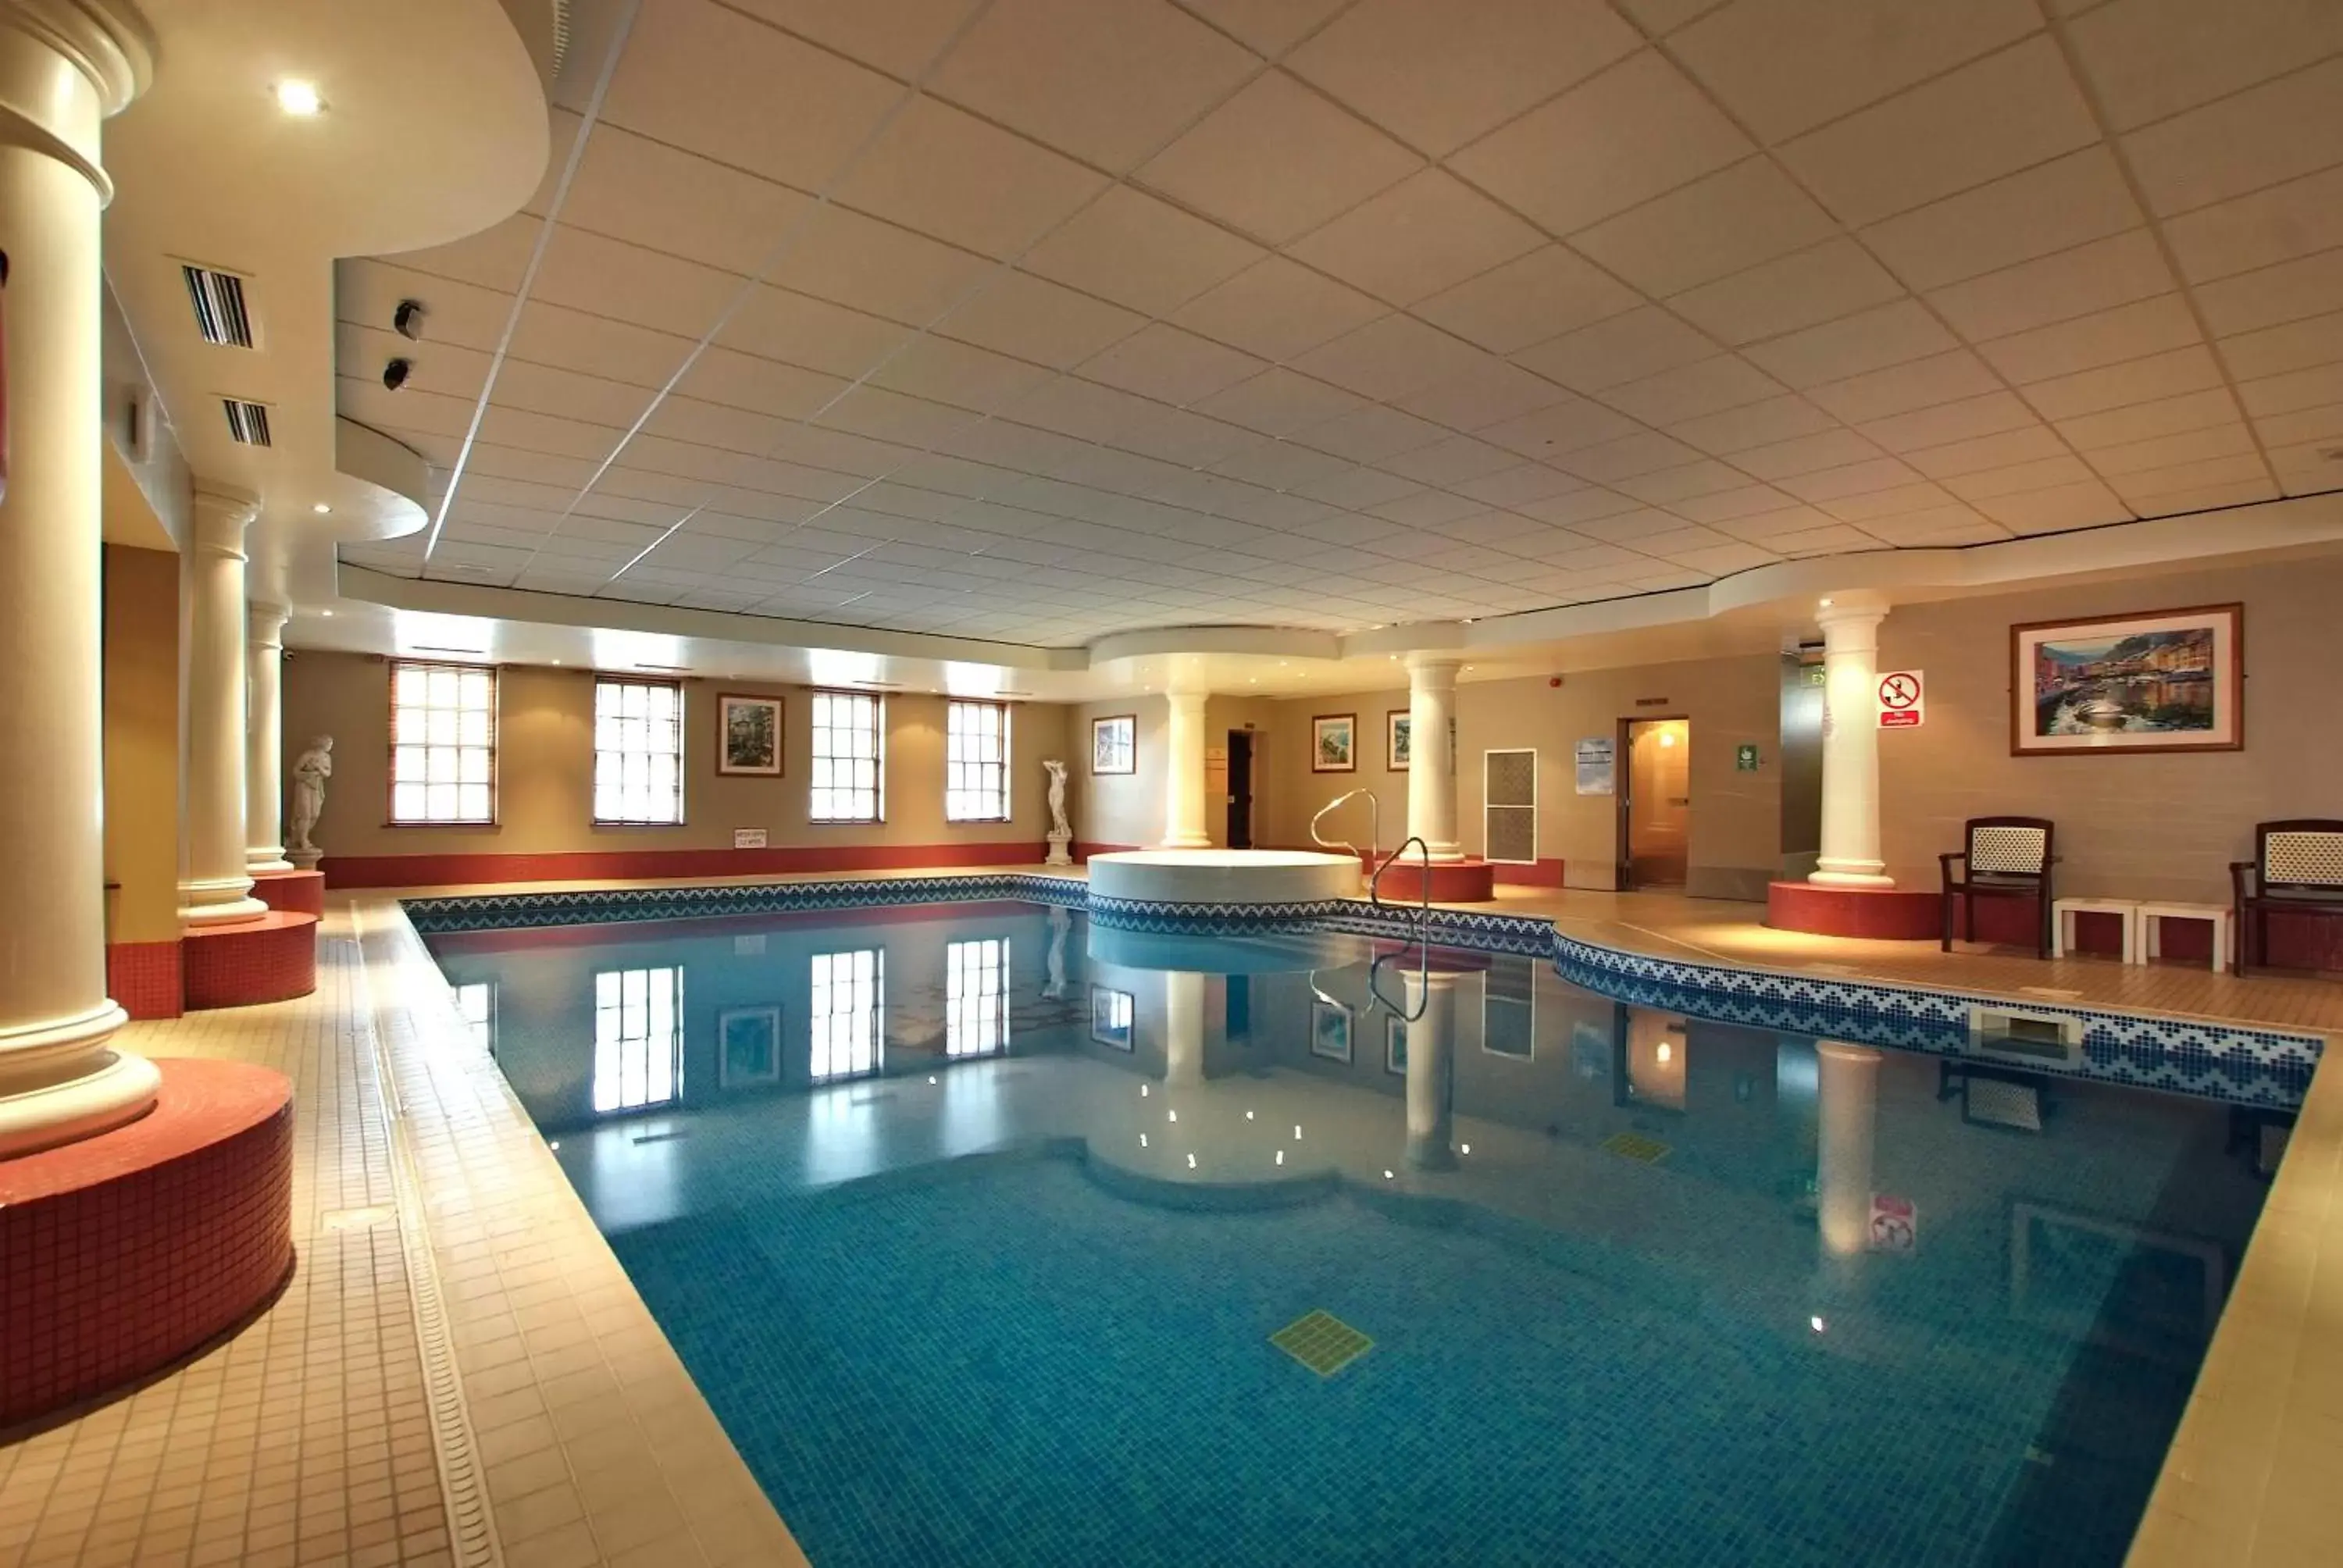 Swimming Pool in The Crown Hotel, Boroughbridge, North Yorkshire